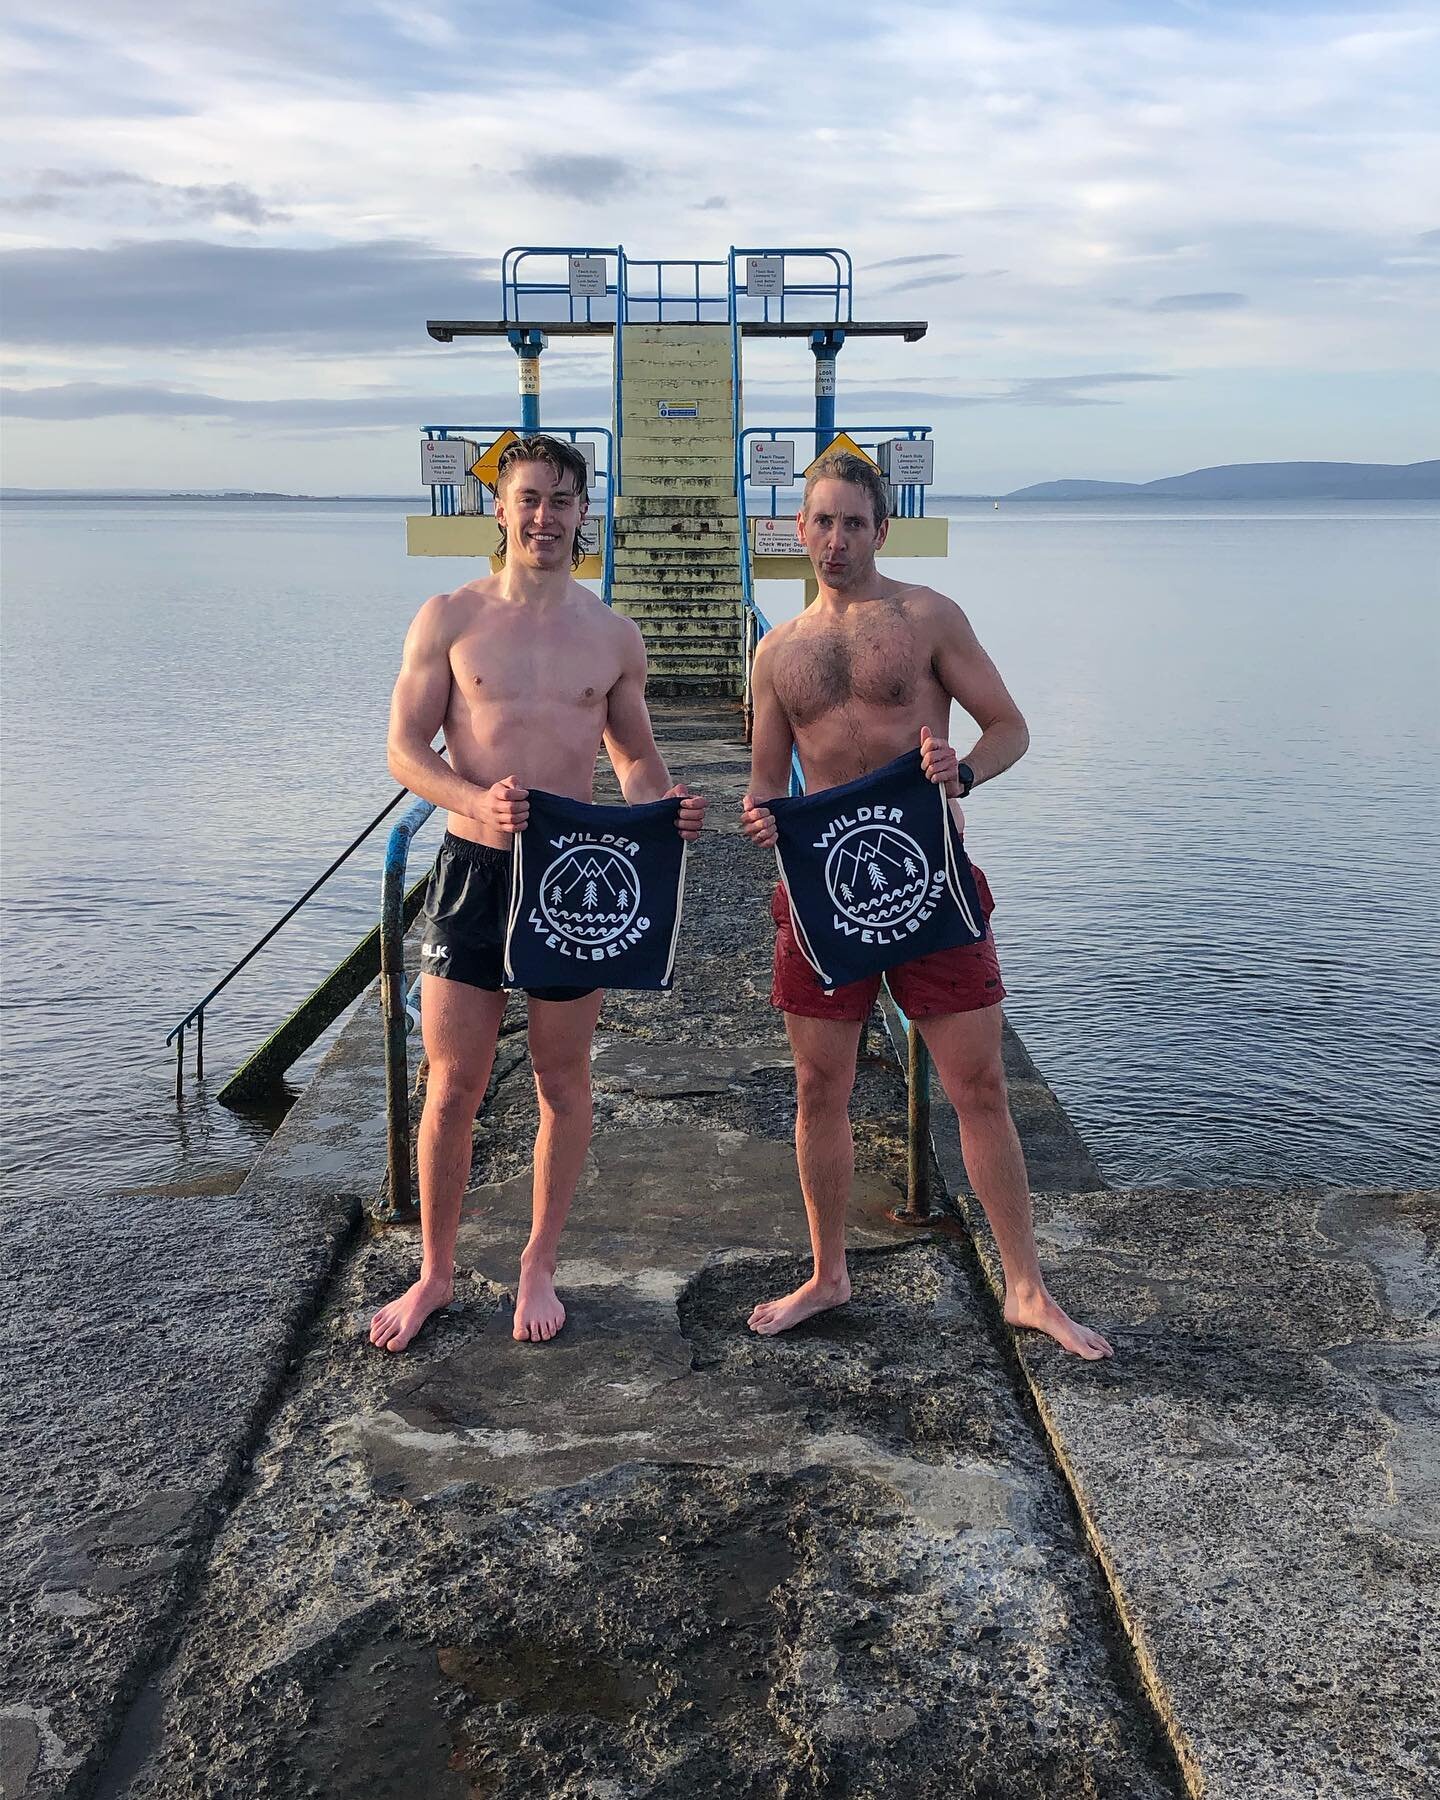 Mark and @declan_oloughlin.18 doing some &ldquo;mild posing&rdquo; down Blackrock earlier with their Wilder Wellbeing Active Summer&hellip;drawstring&hellip;..bag 😮&zwj;💨 

Someone please come up with a better name and drop it in the comments&helli